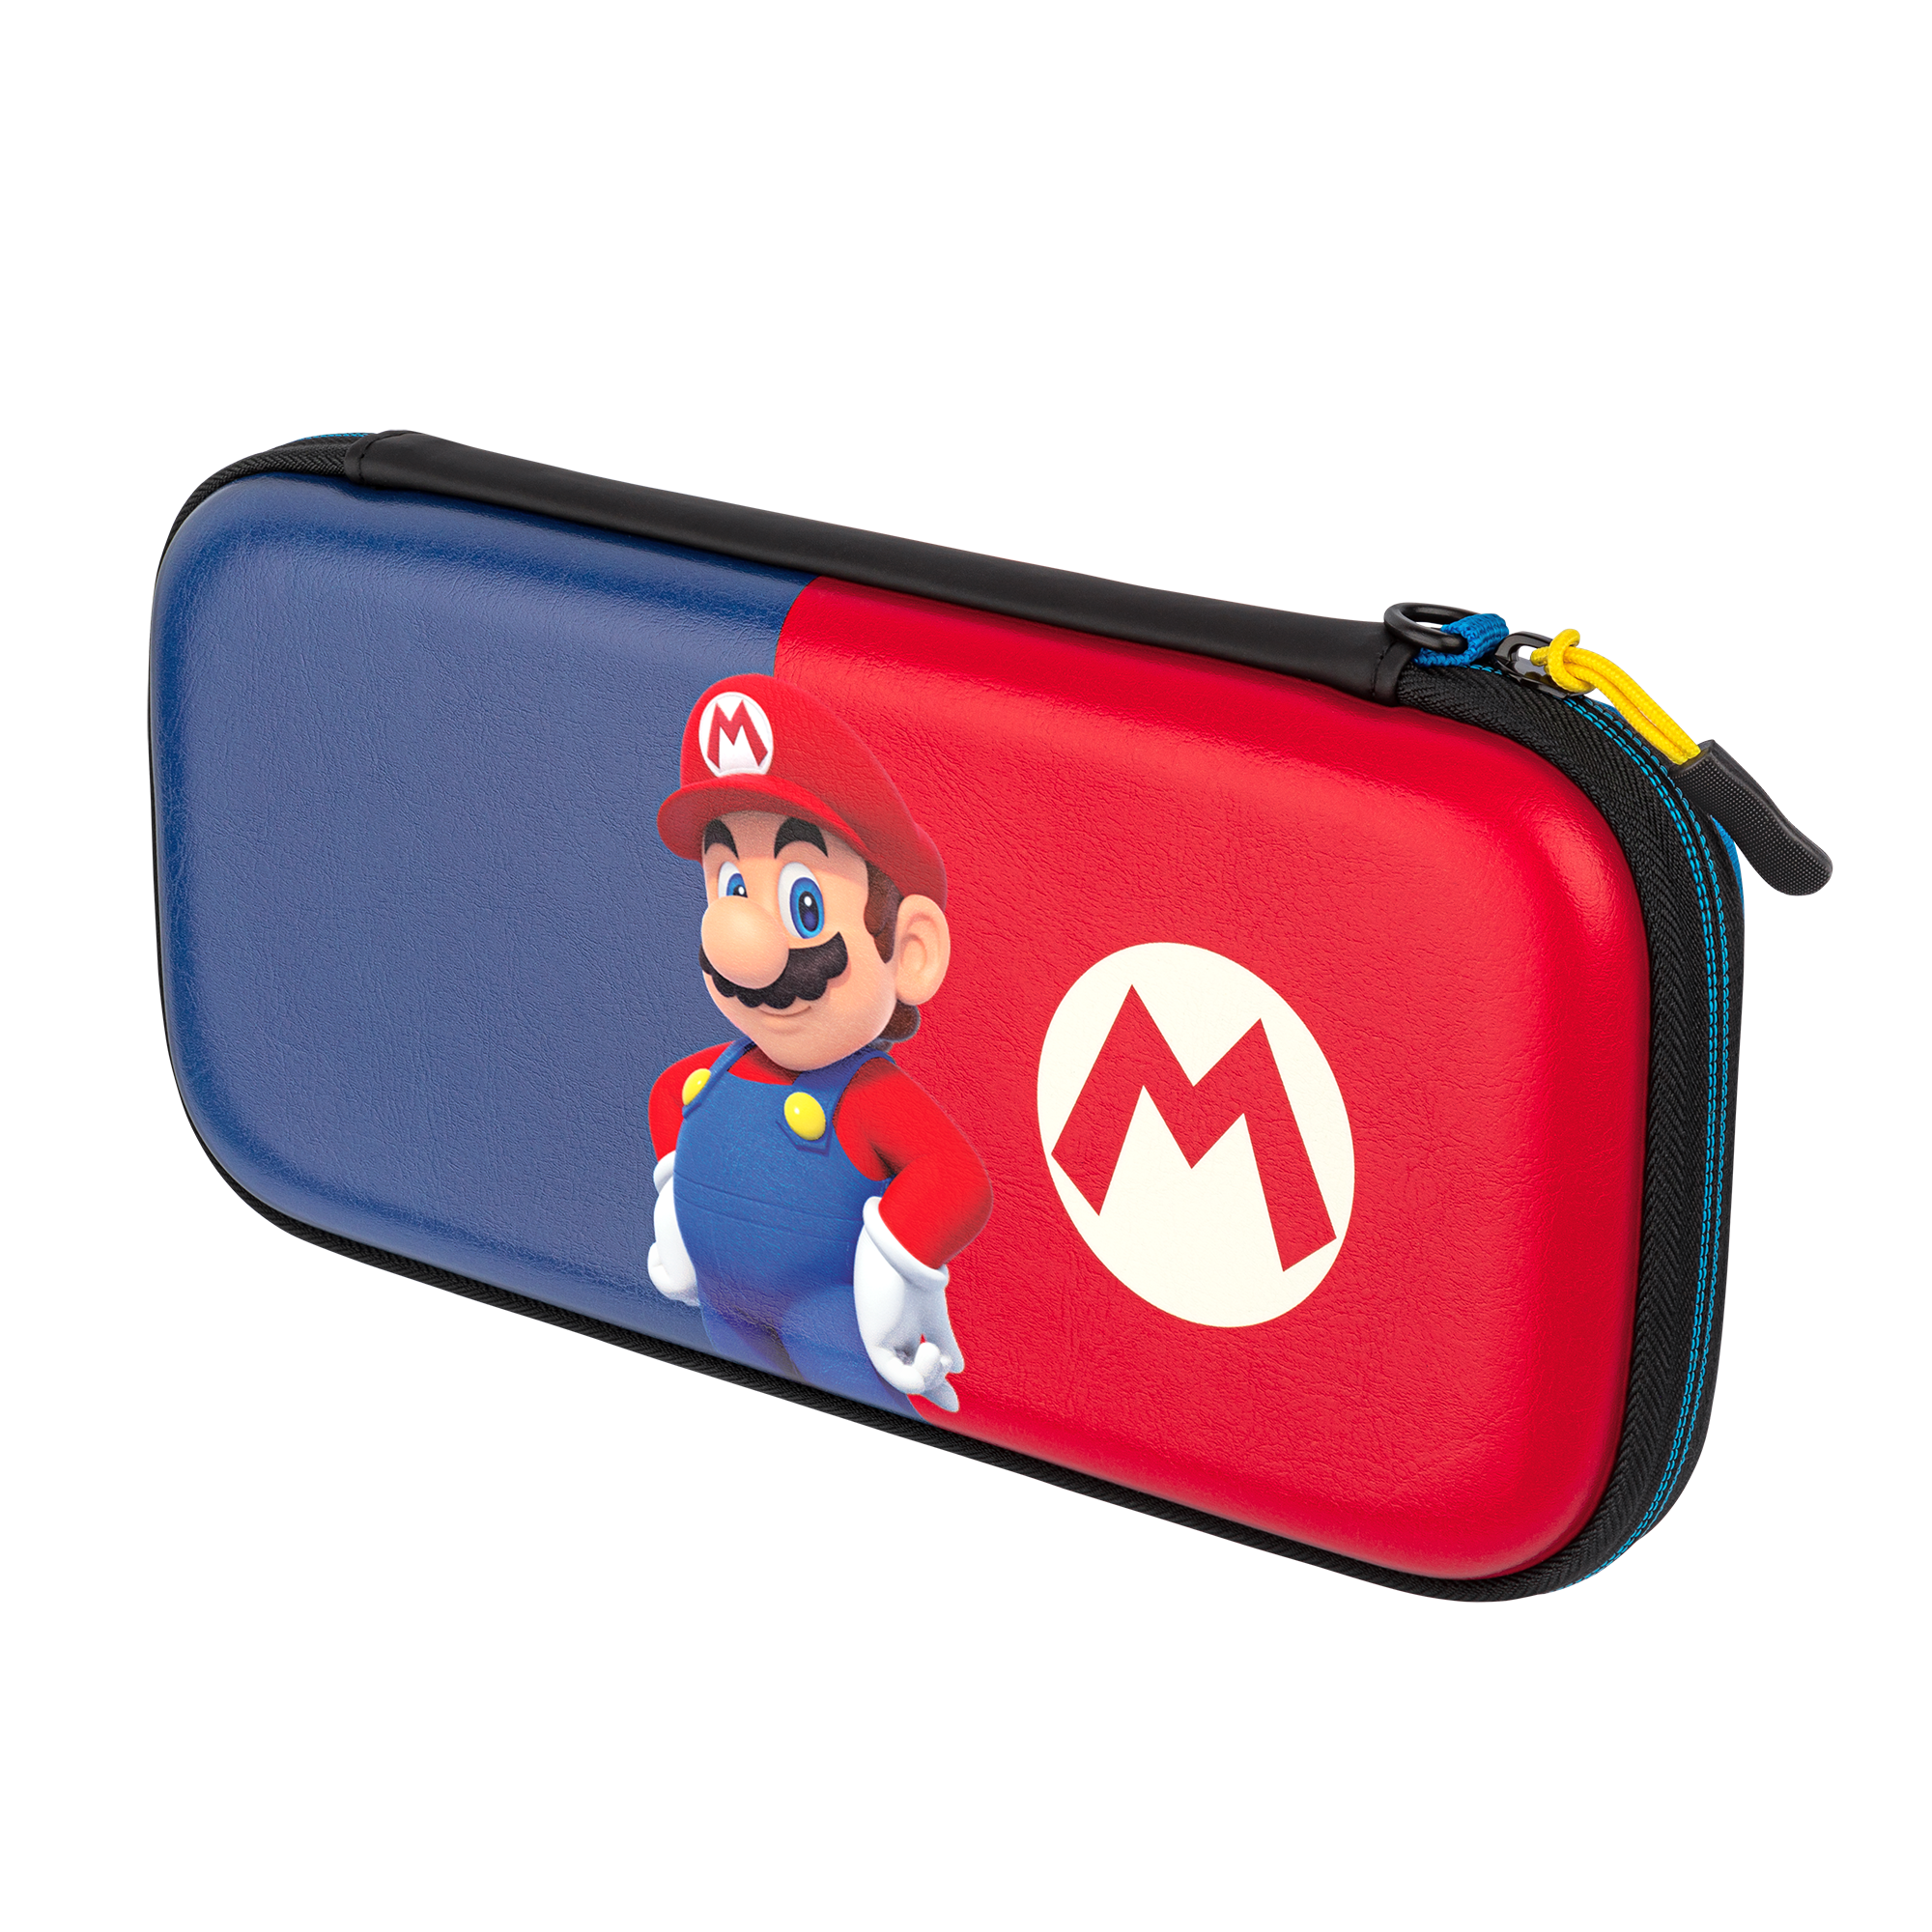 PDP Switch Deluxe Case Elite, Mario, Nintendo Switch - image 4 of 5